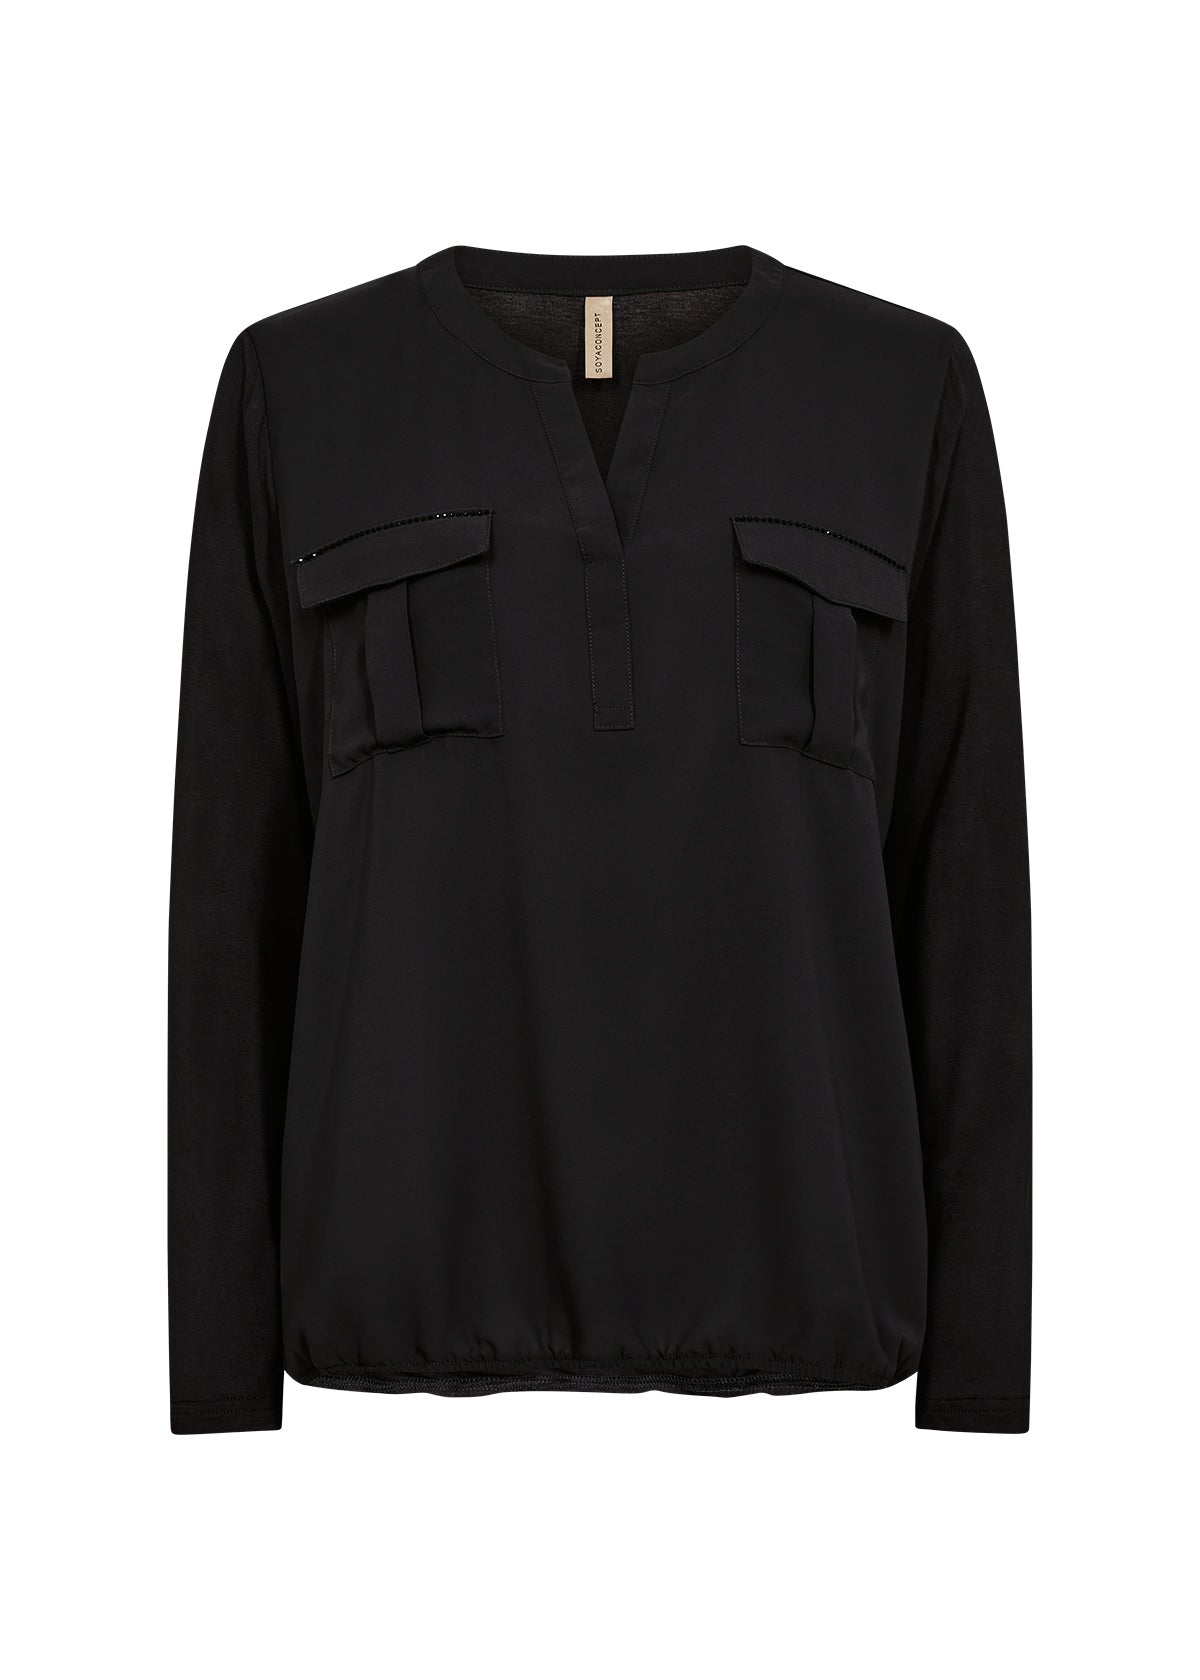 Soya concept HERMINE 1 black silky blouse with detailed pockets